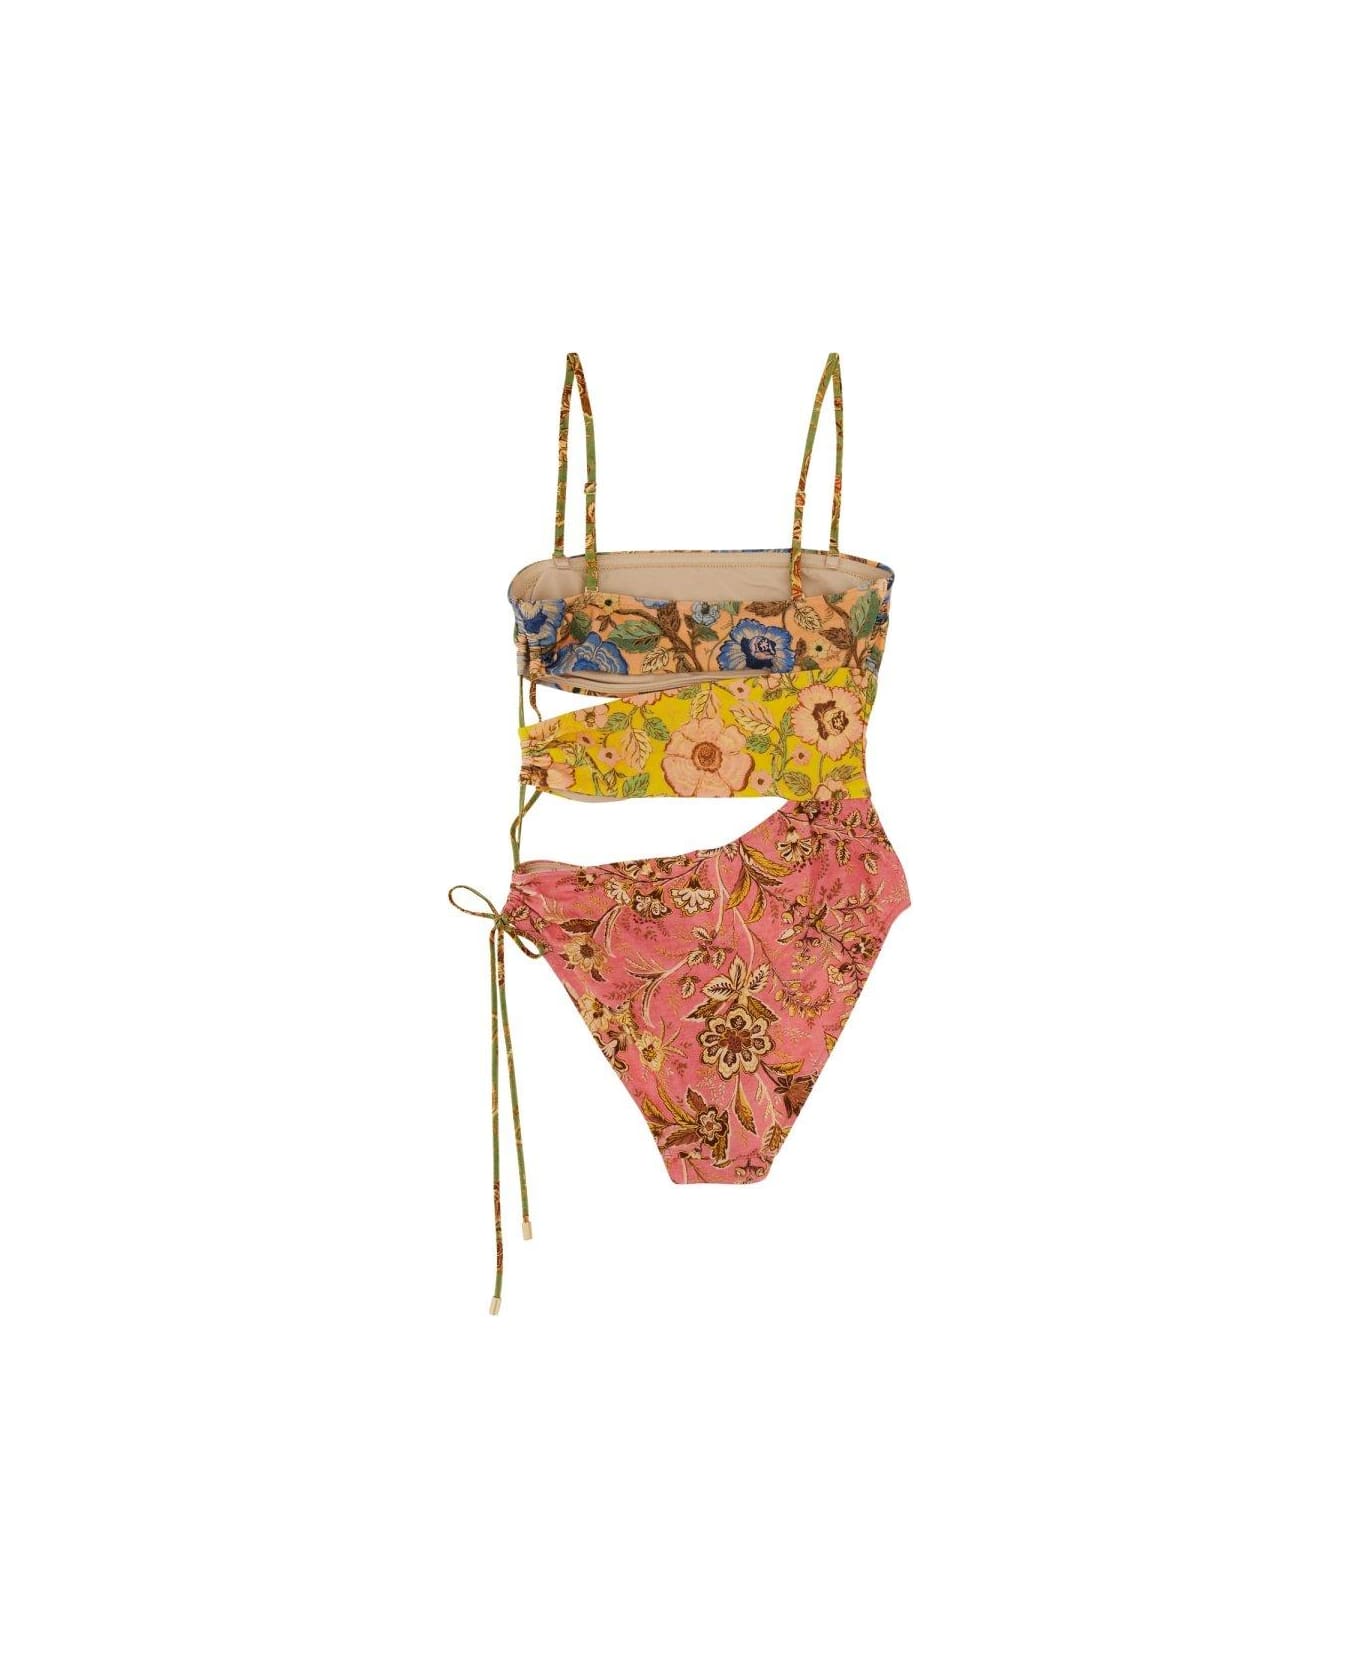 Zimmermann Floral Printed Cut-out One-piece Swimsuit - Multicolor